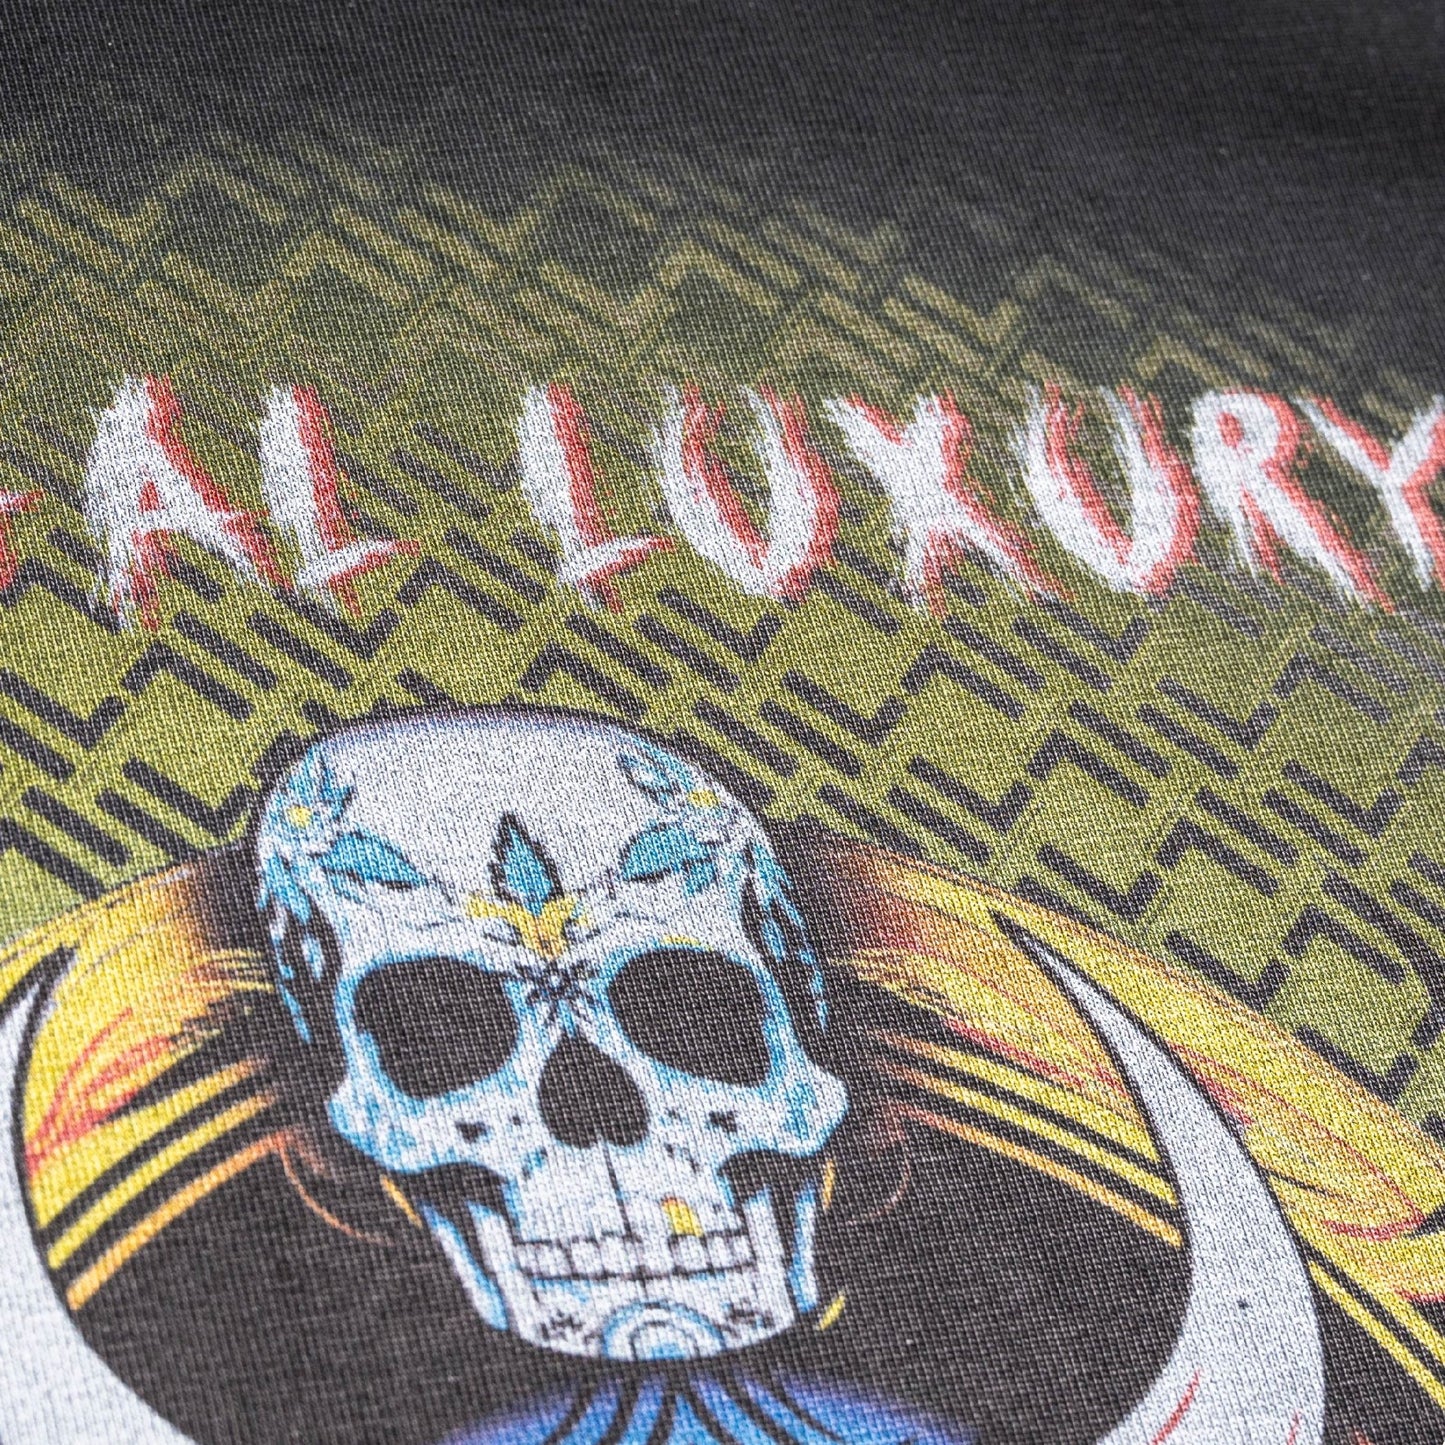 T-Shirt No.3 "Skull trophy" Limited Edition - ILLEGAL LUXURY